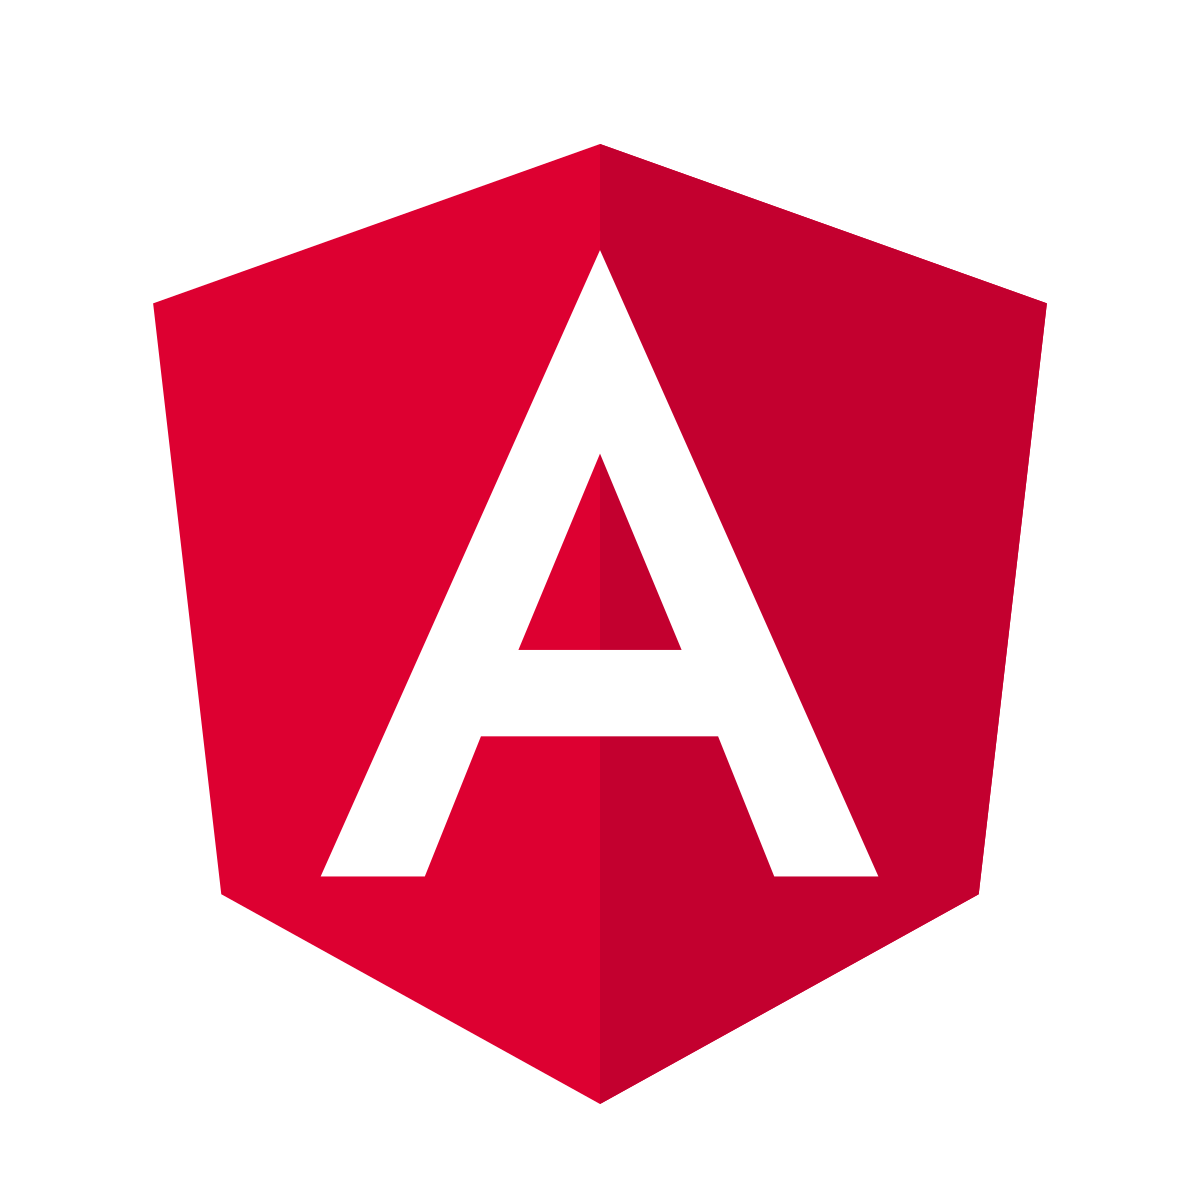 Angular - The Complete Guide (2020 Edition)
